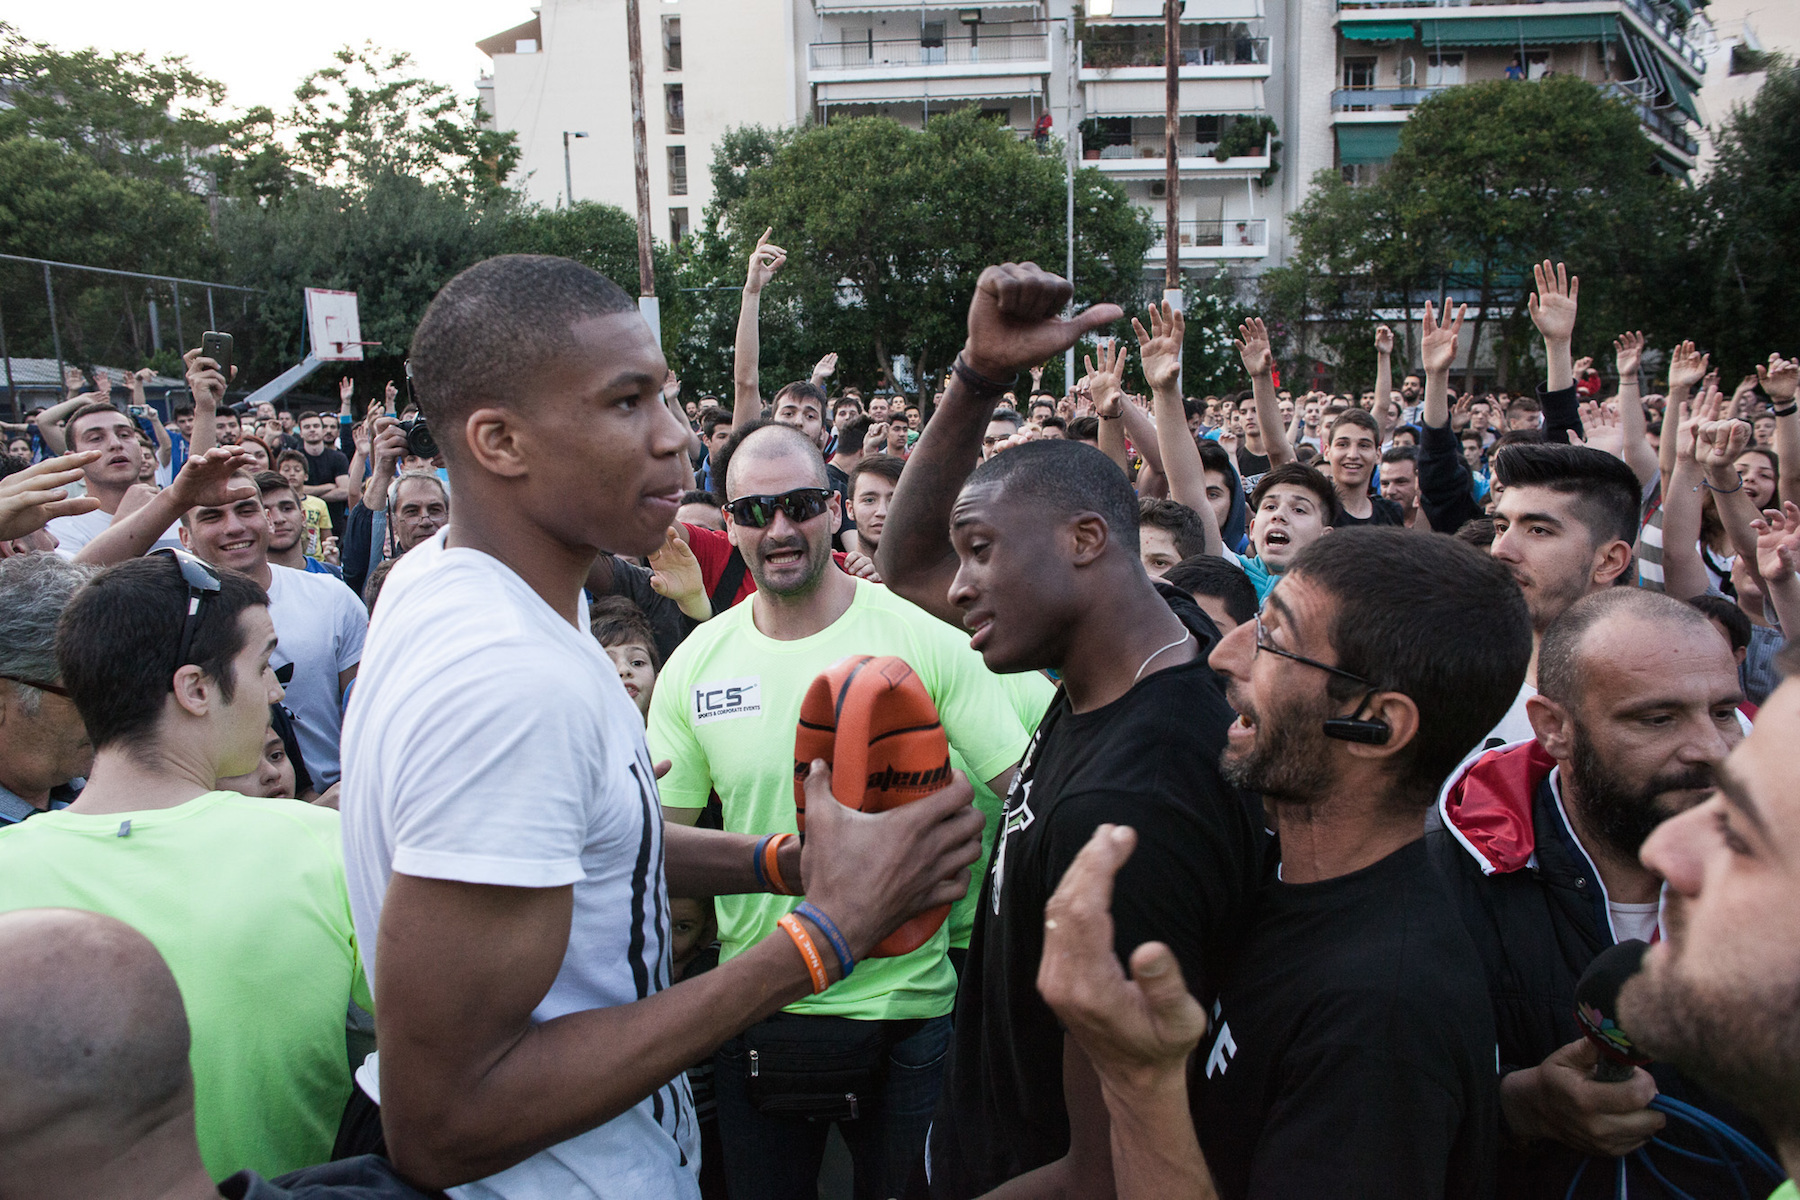 Athens Went Nuts for Its Returning NBA Star Giannis Antetokounmpo Last Week - VICE